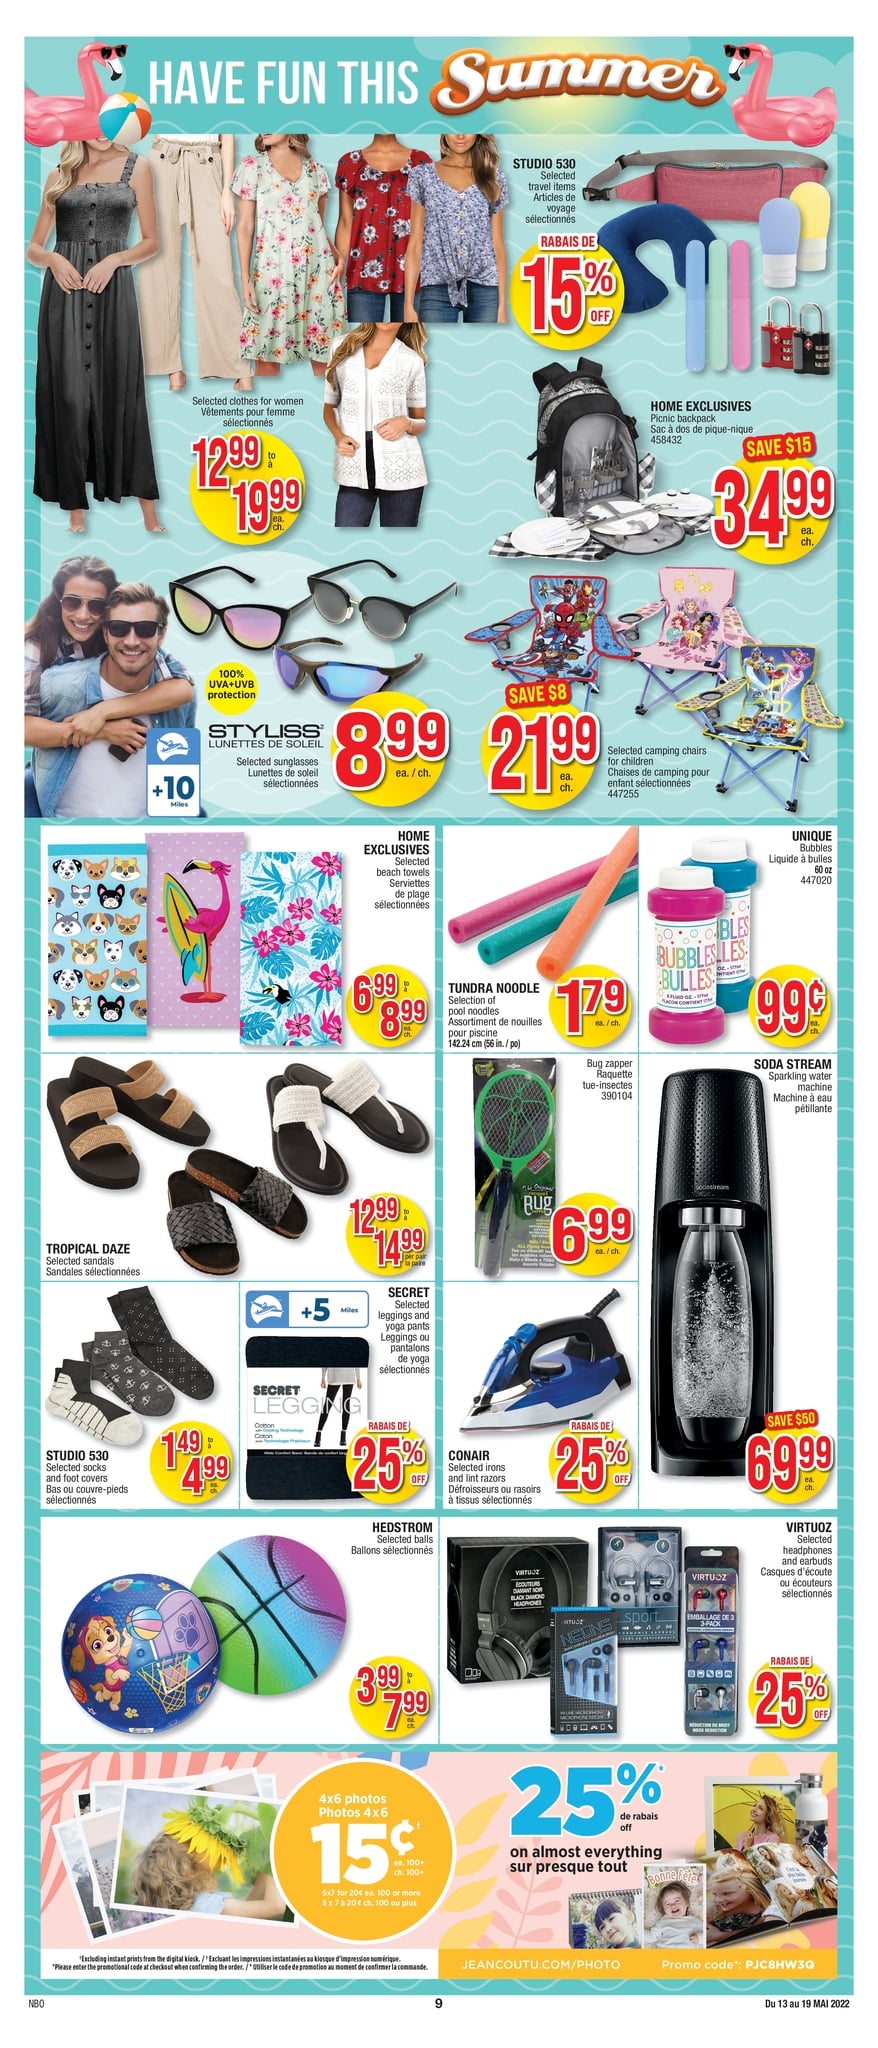 Jean Coutu - Weekly Flyer Specials - Page 9